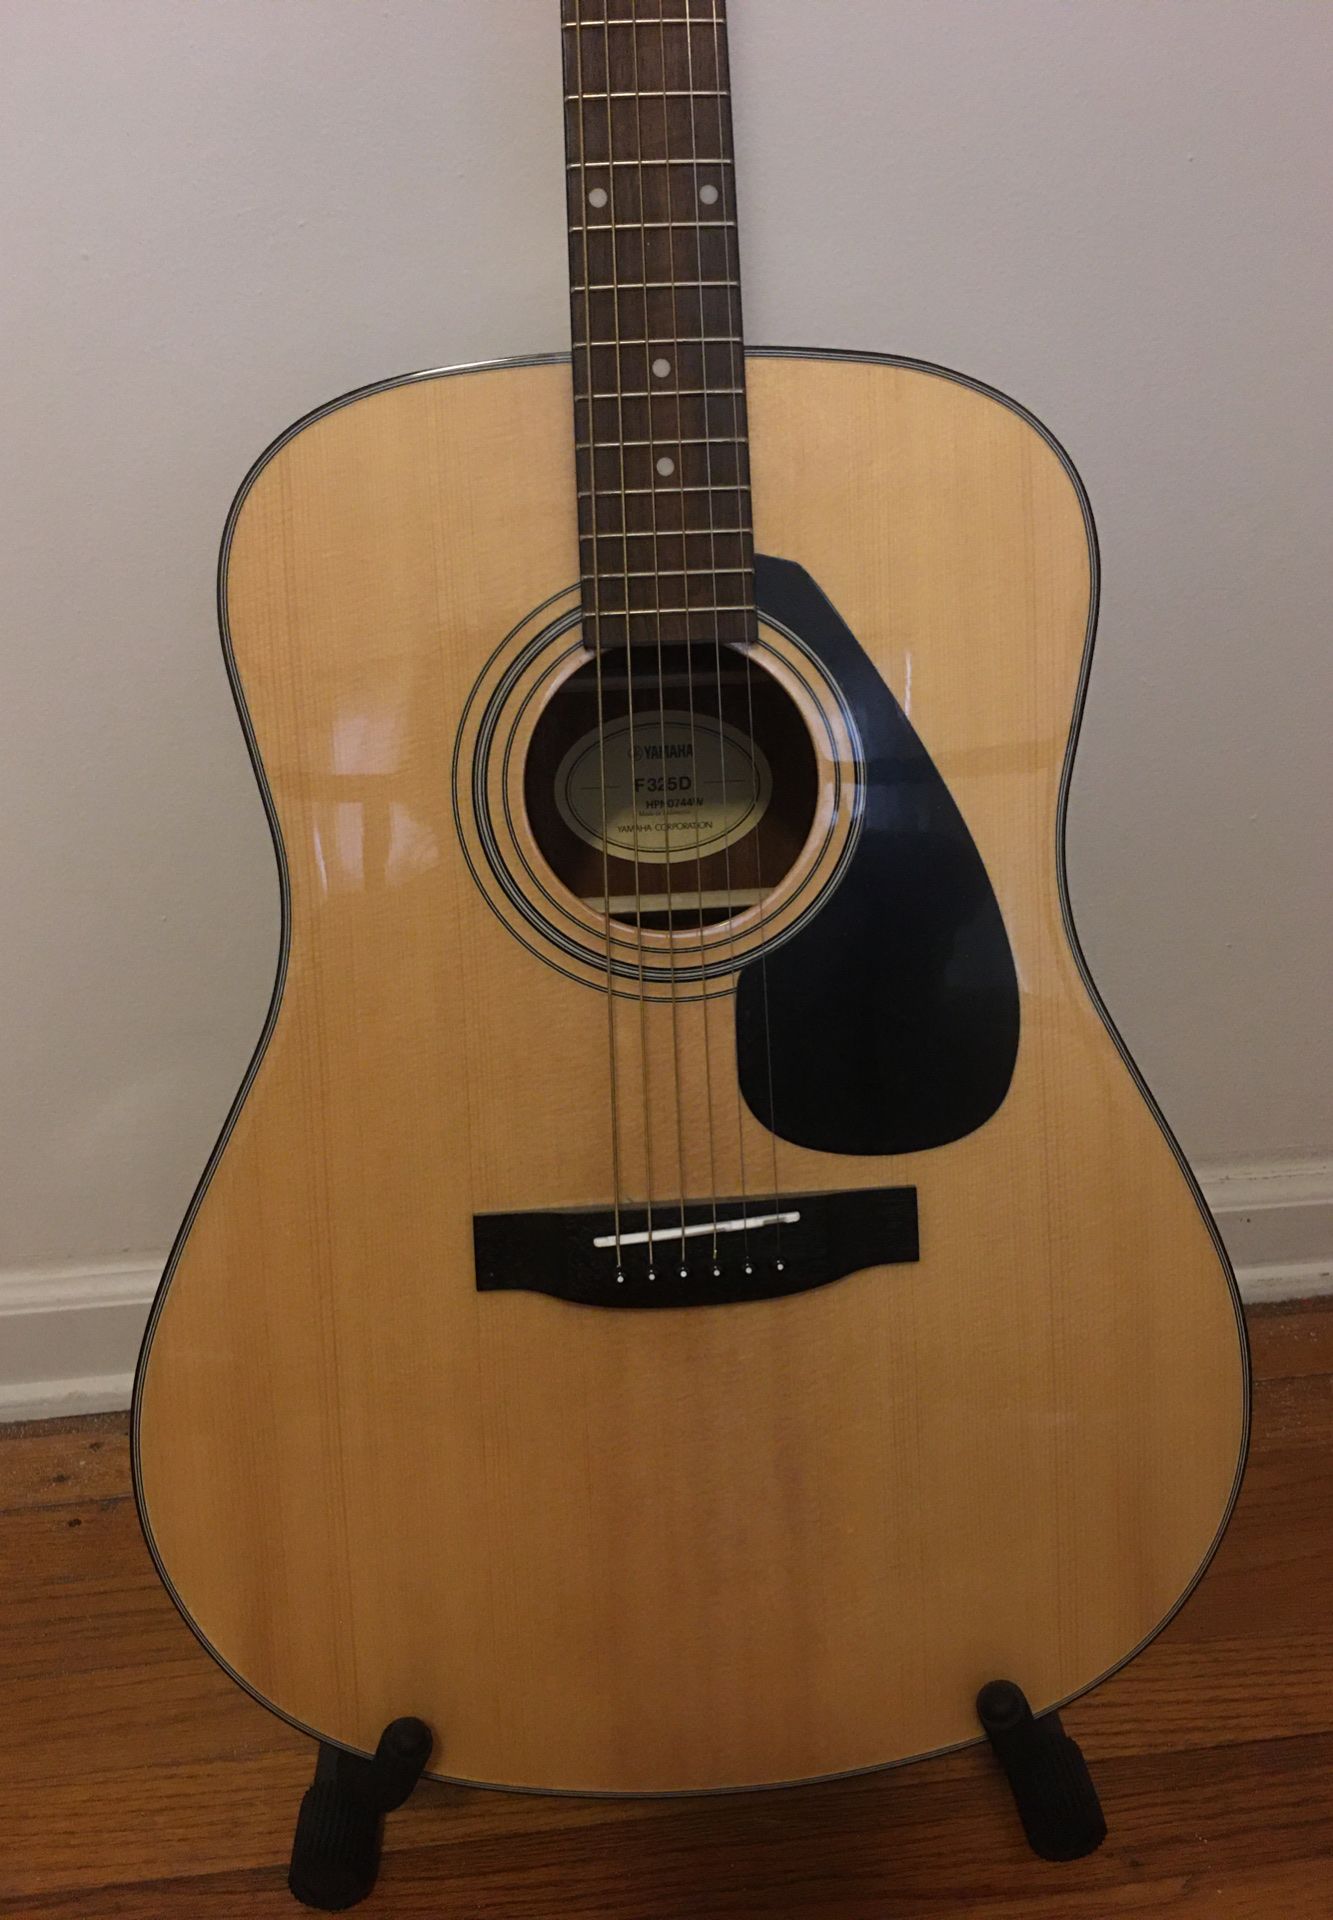 Yamaha acoustic guitar with stand, new strings, tuner and picks